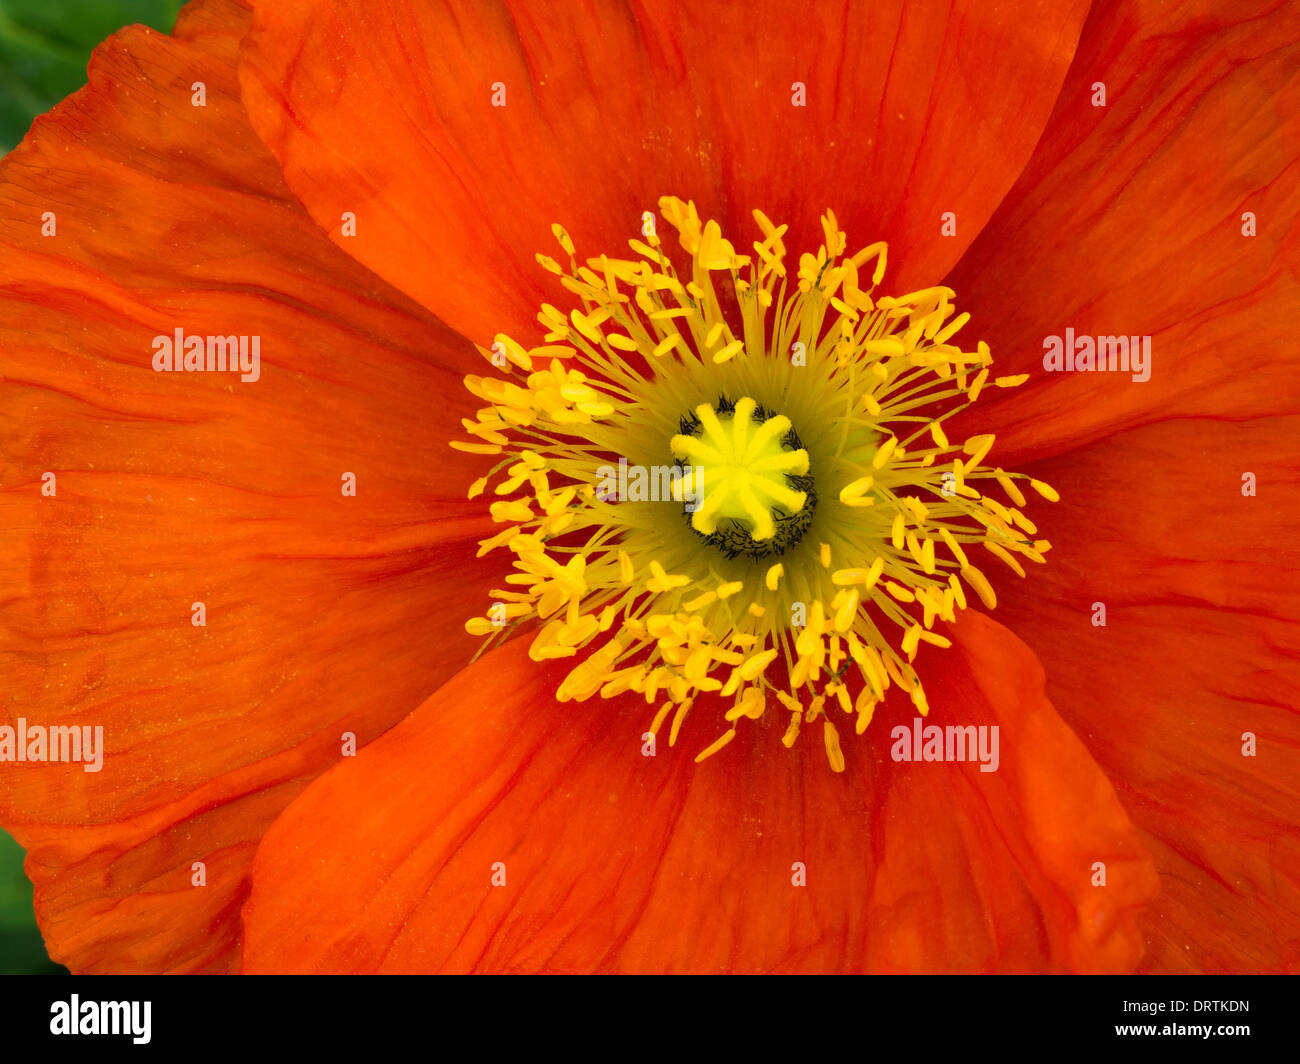 Bright red Papaver poppy flower detail with central yellow pistil and stamens closeup Stock Photo